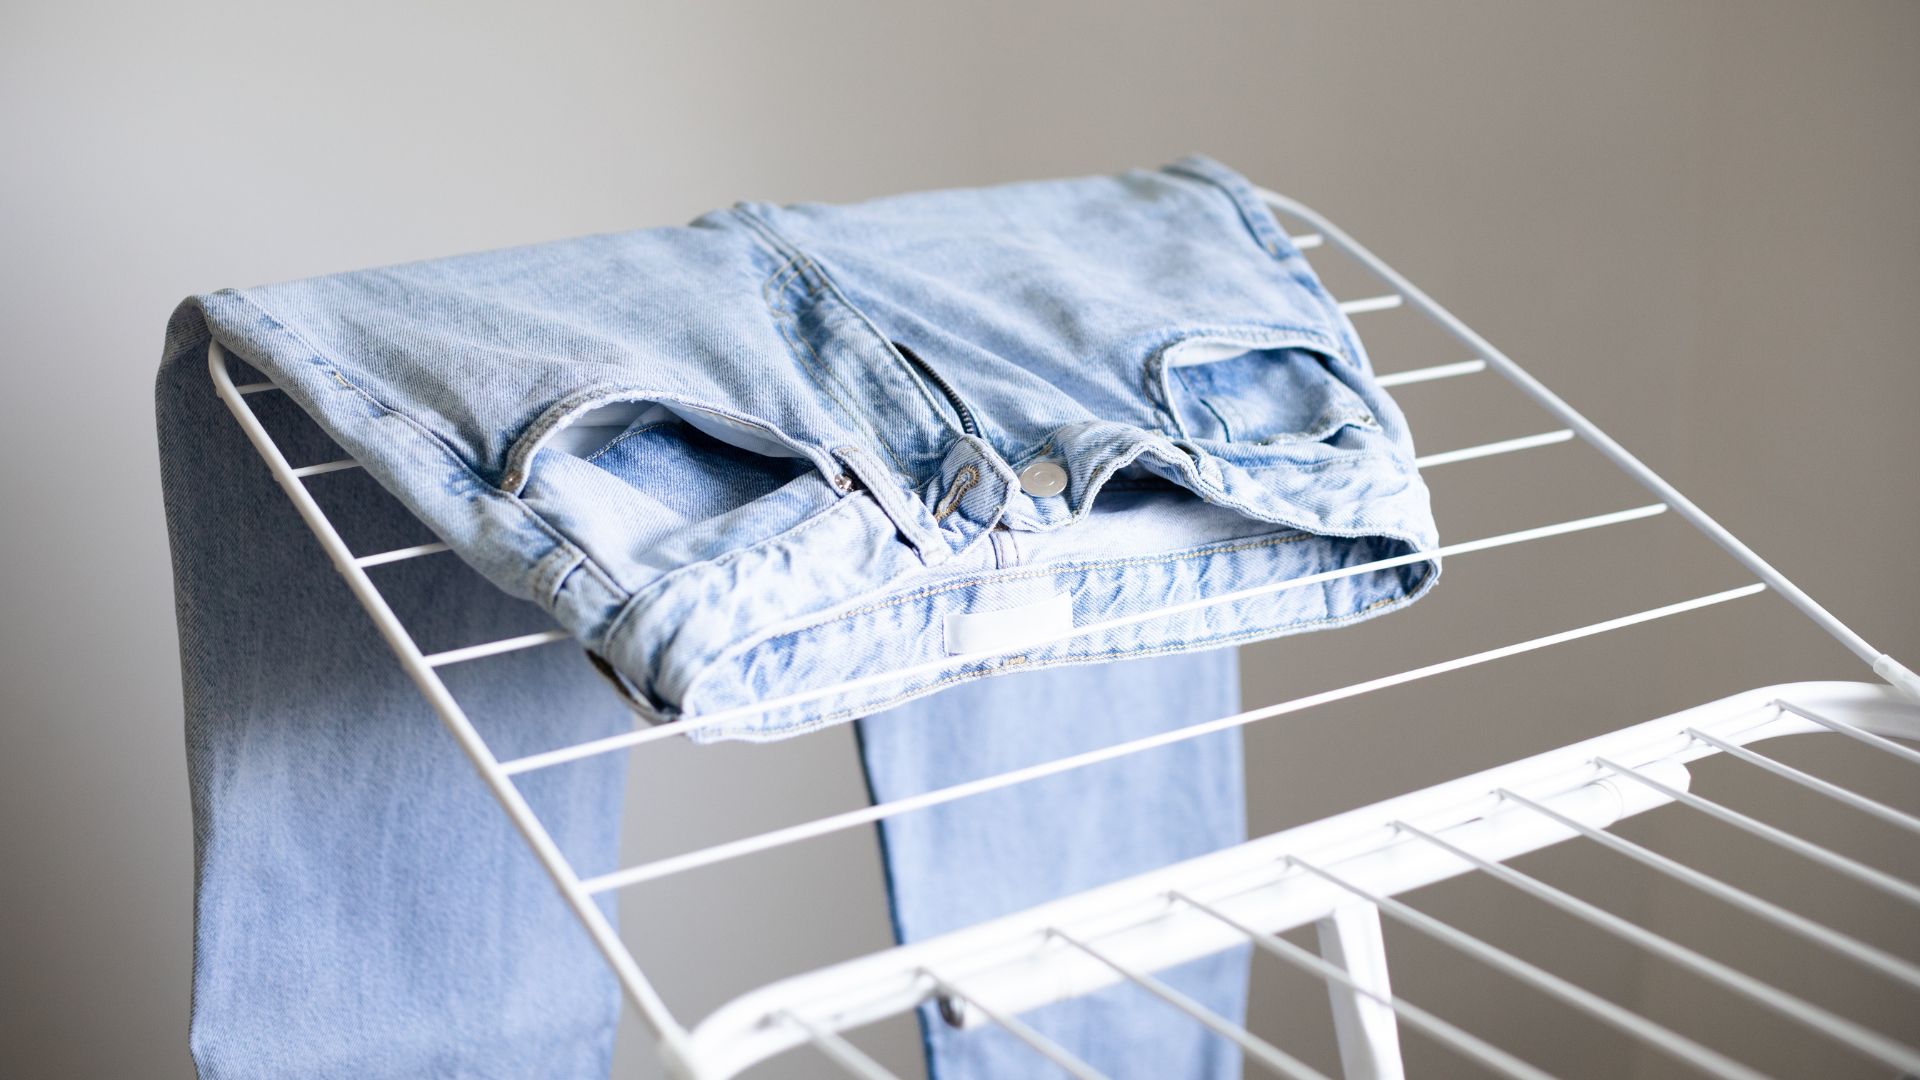 Jeans too loose? Here's how to shrink jeans according to experts ...